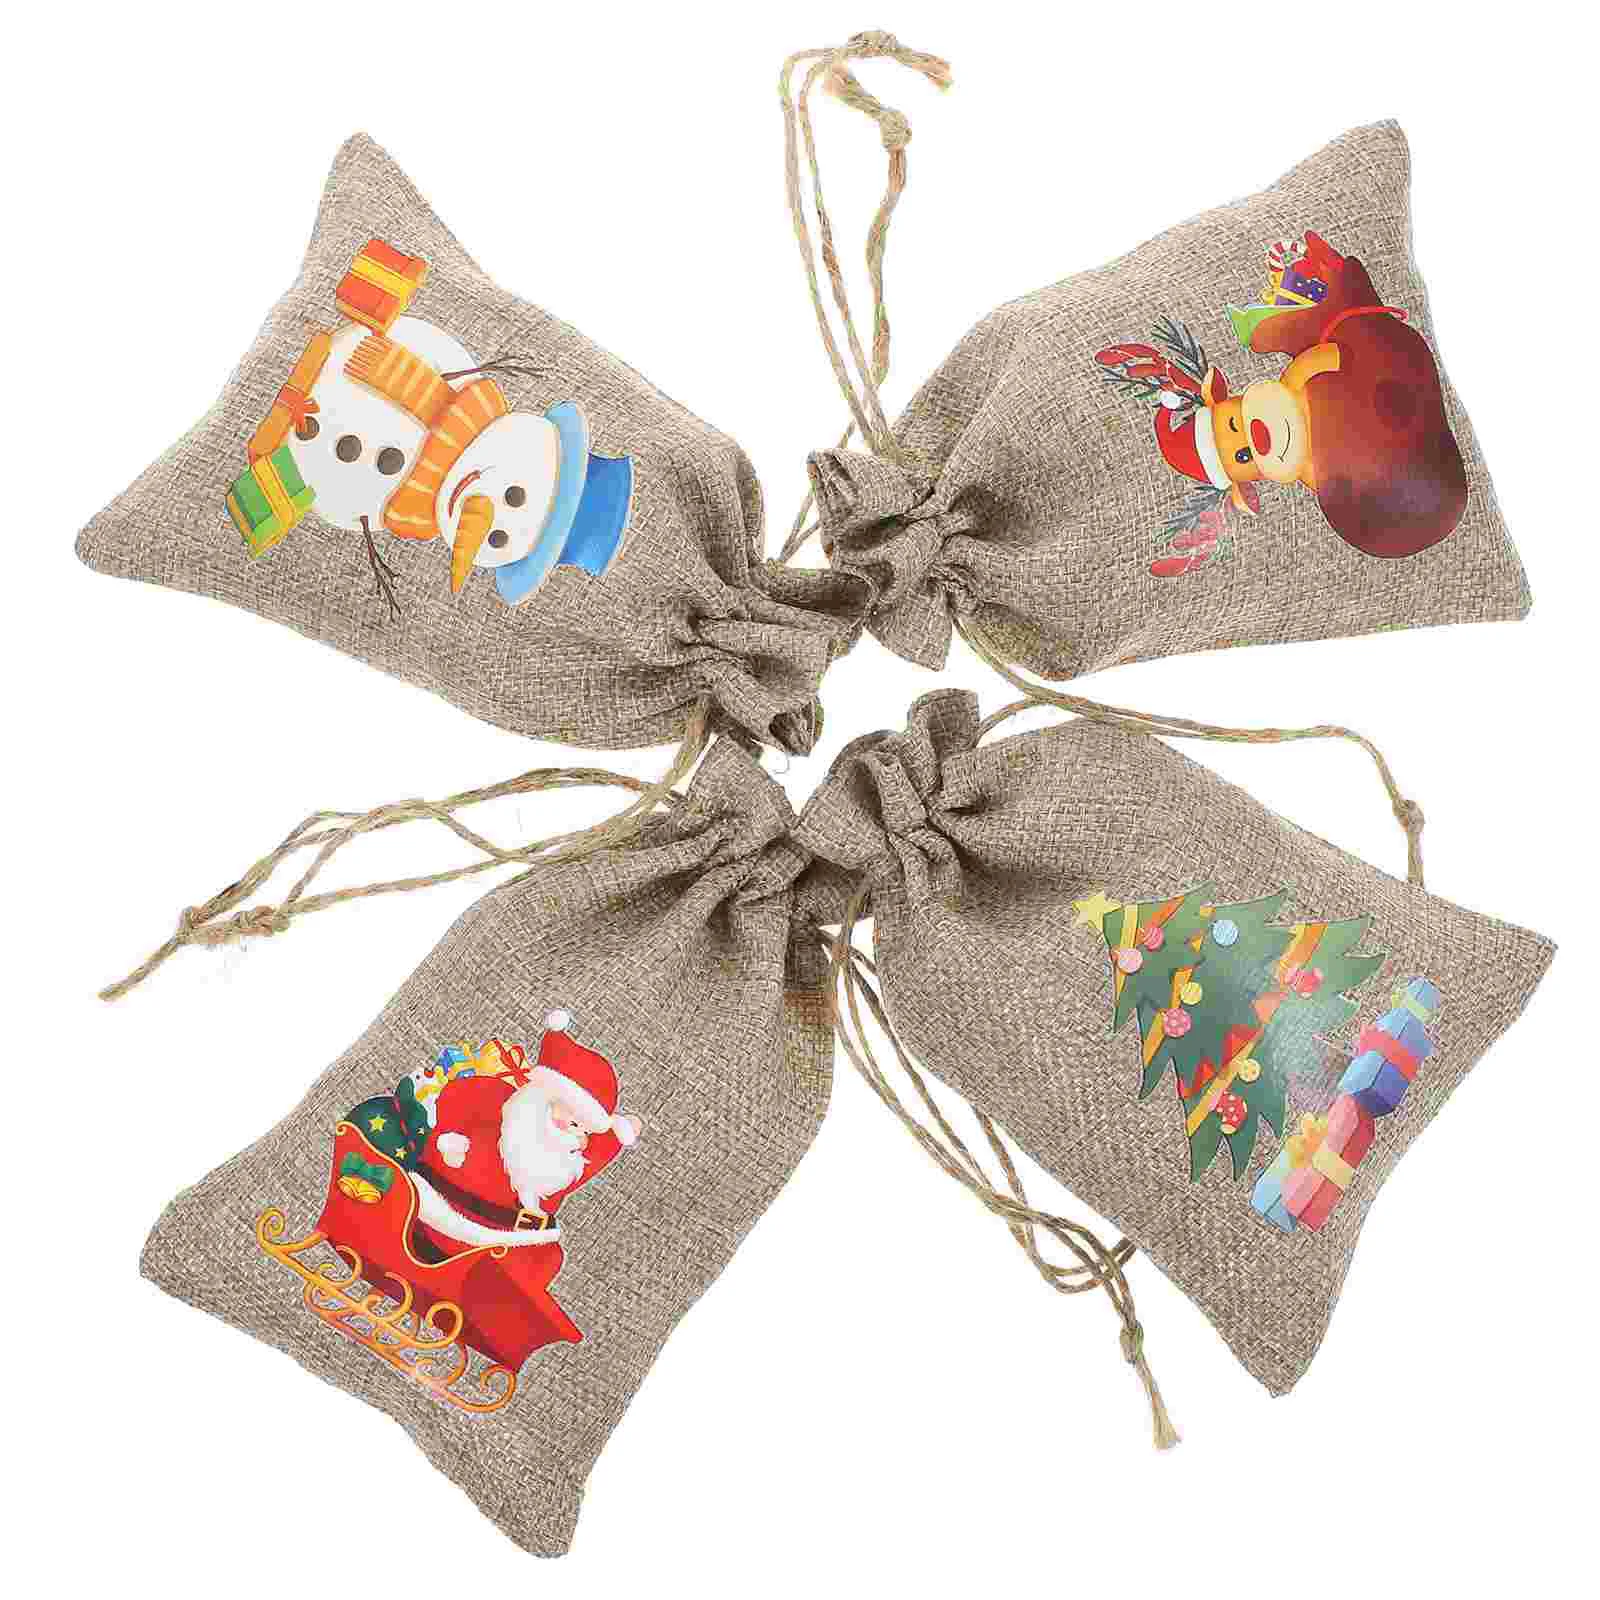 

24 Pcs Gift Bags Christmas Sack Drawstring Pouches Wrapping Burlap Packing Snacks Party Supplies Treats Elder